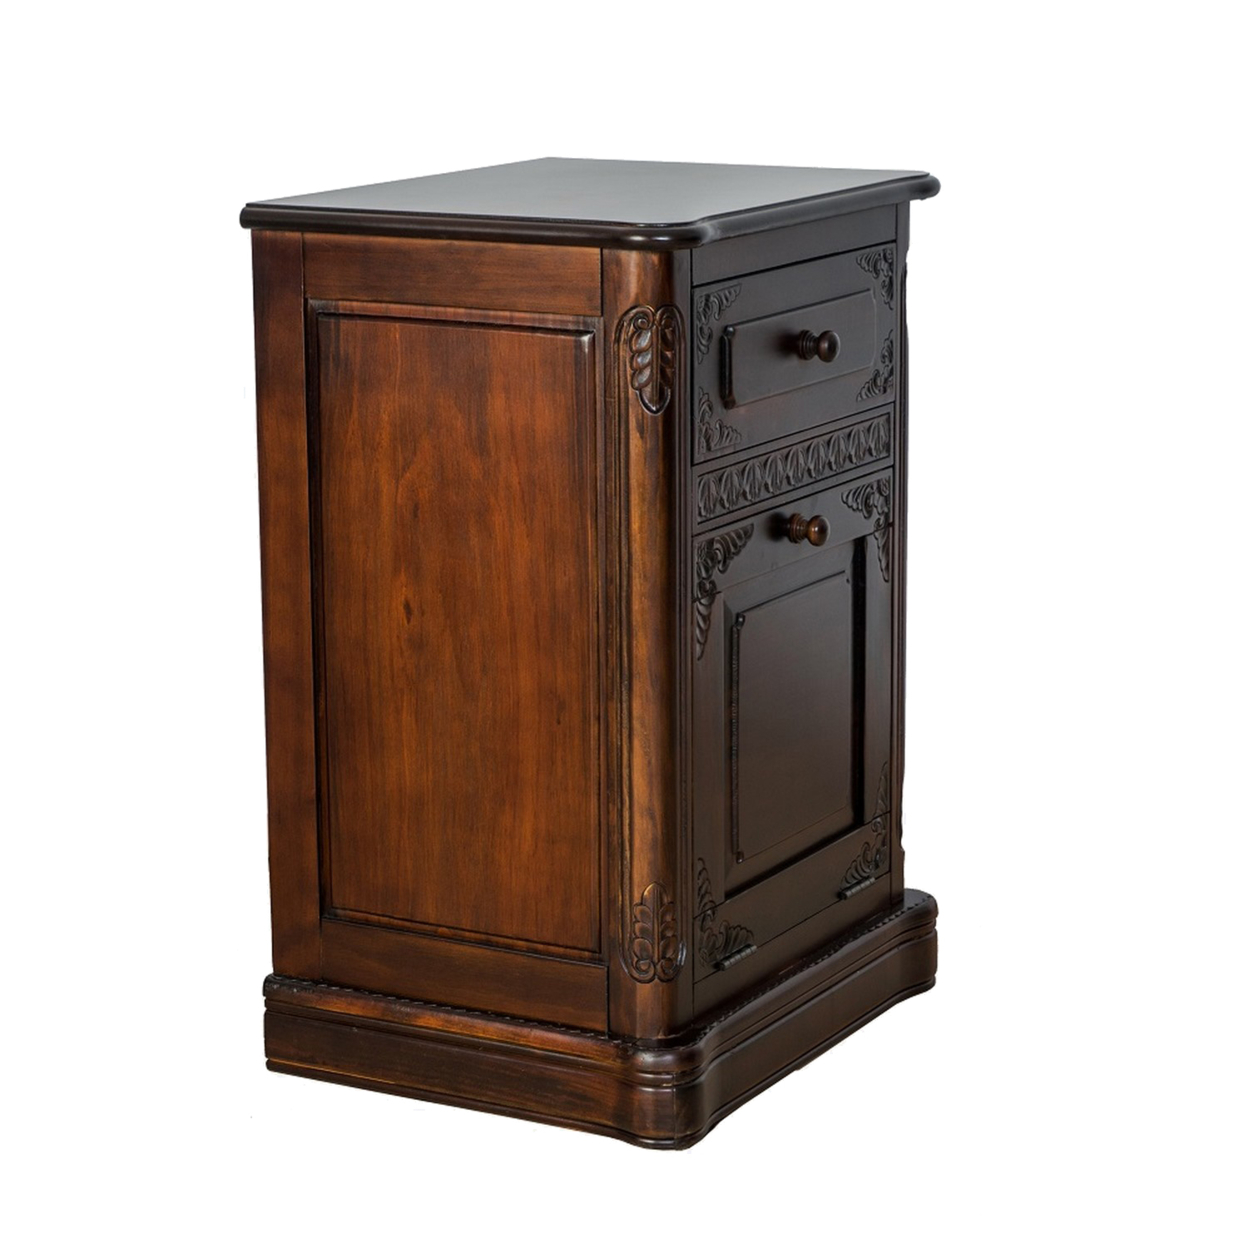 Cabinet With 1 Drop Down Door And Intricate Carved Details, Brown- Saltoro Sherpi